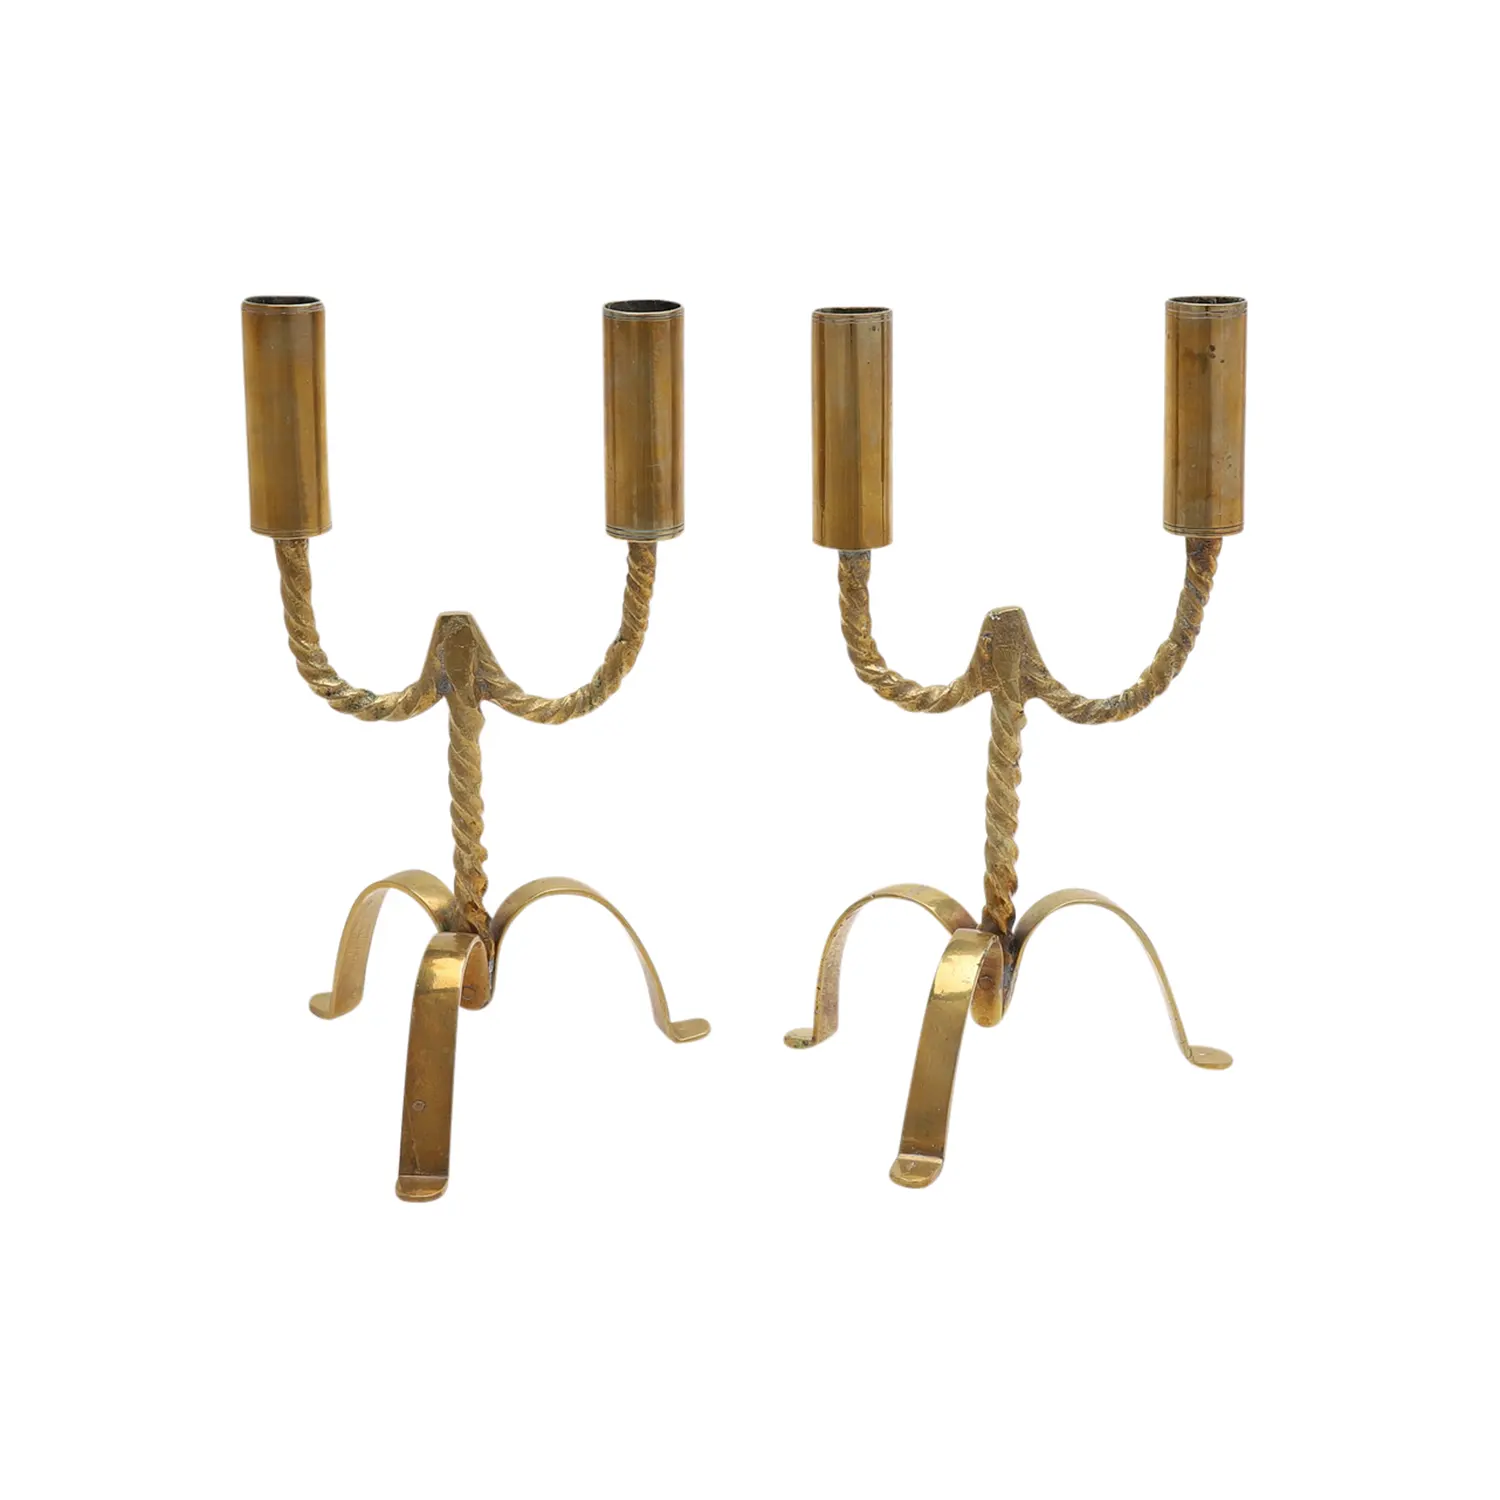 20th Century Swedish Pair of Wrought-Iron Candle Holders – Brass Candlesticks